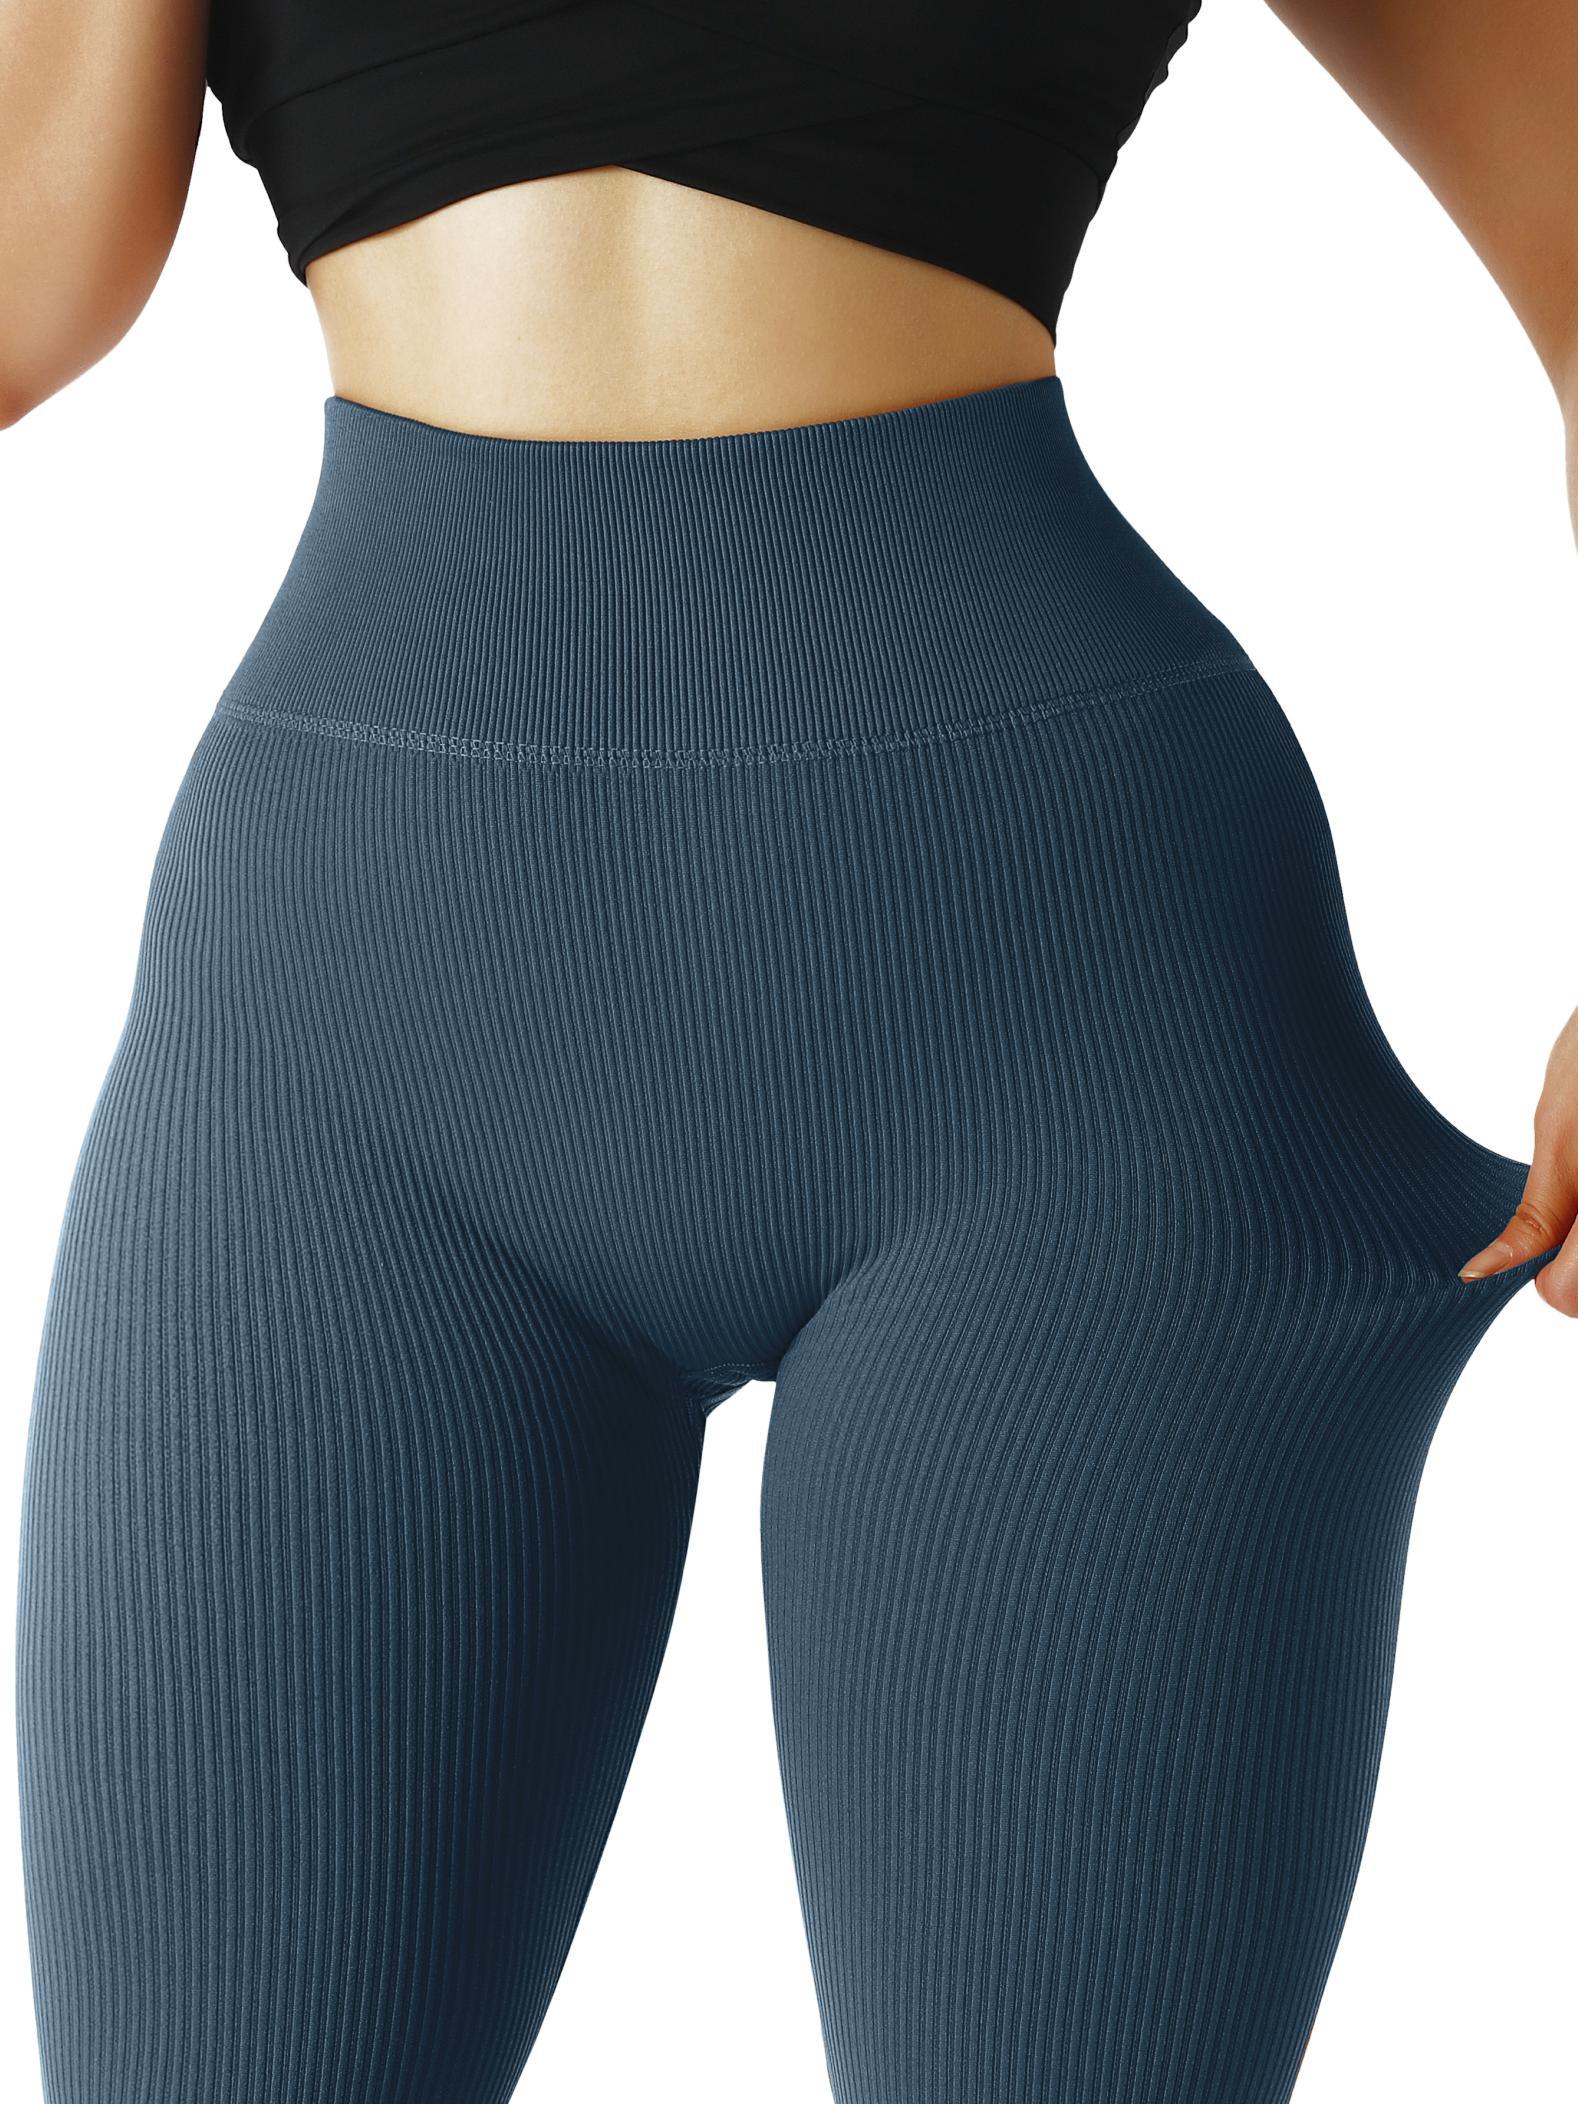  Dragon Fit High Waist Yoga Pants for Women Butt Lifting Gym  Workout Running Leggings with Pockets Blue : Clothing, Shoes & Jewelry